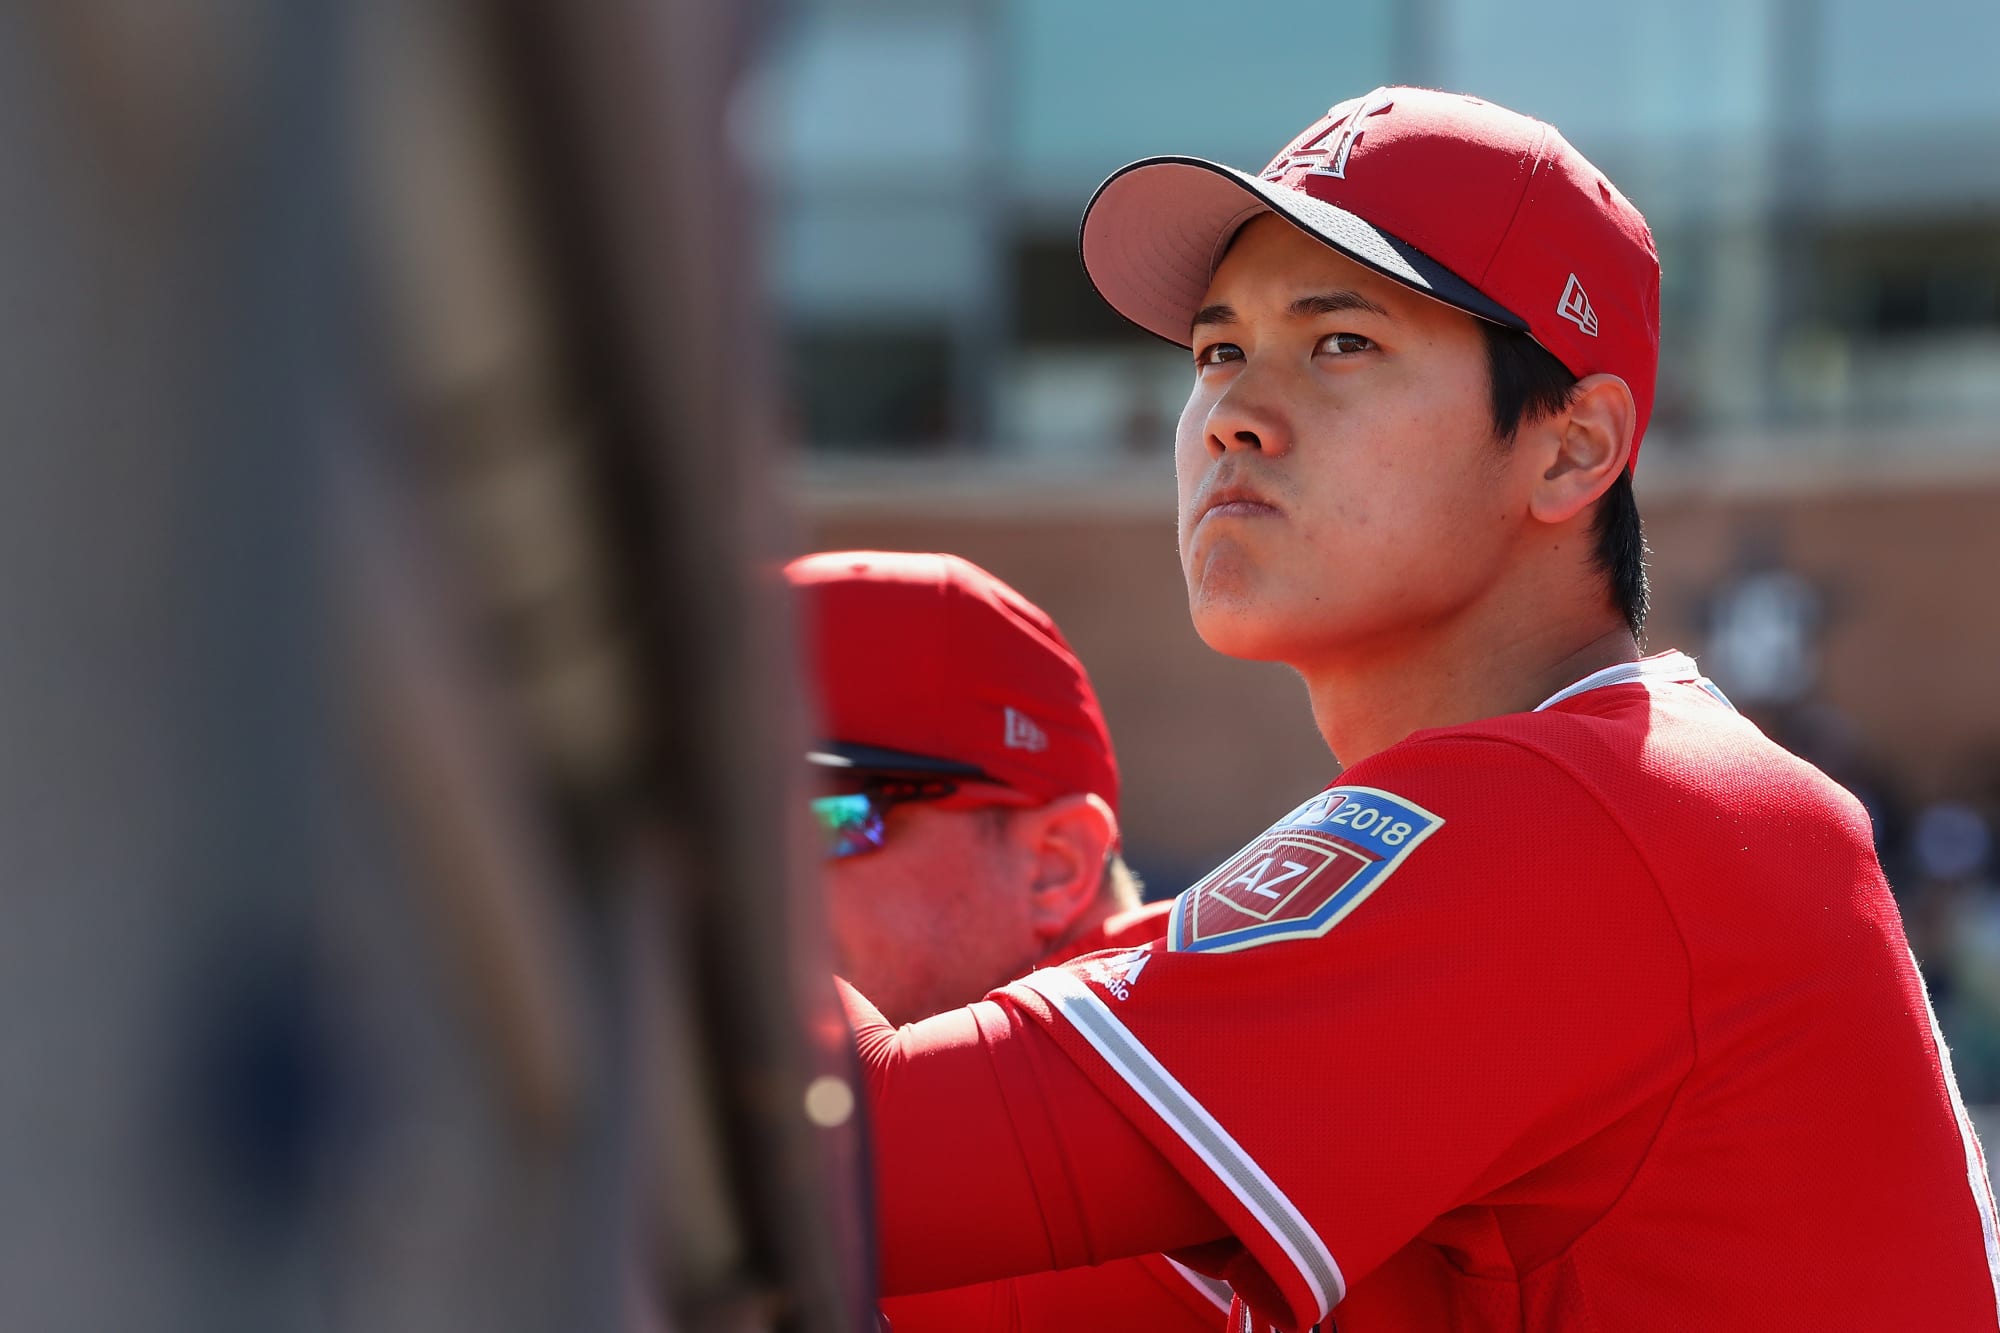 Shohei ohtani homers, throws 101 mph in first inning. 